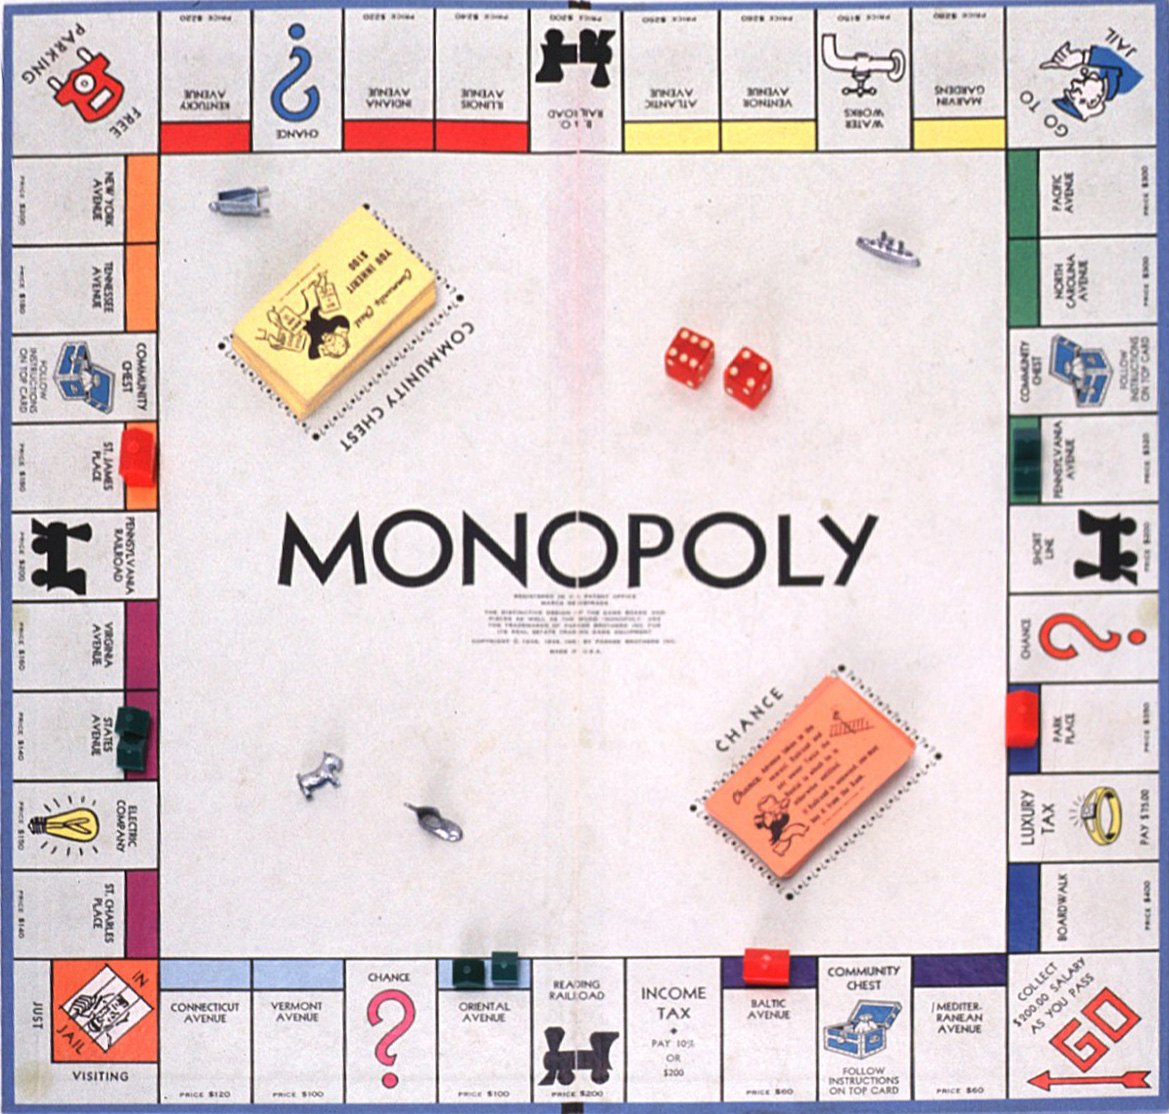 Monopoly passing go on Facebook courtesy of Playfish